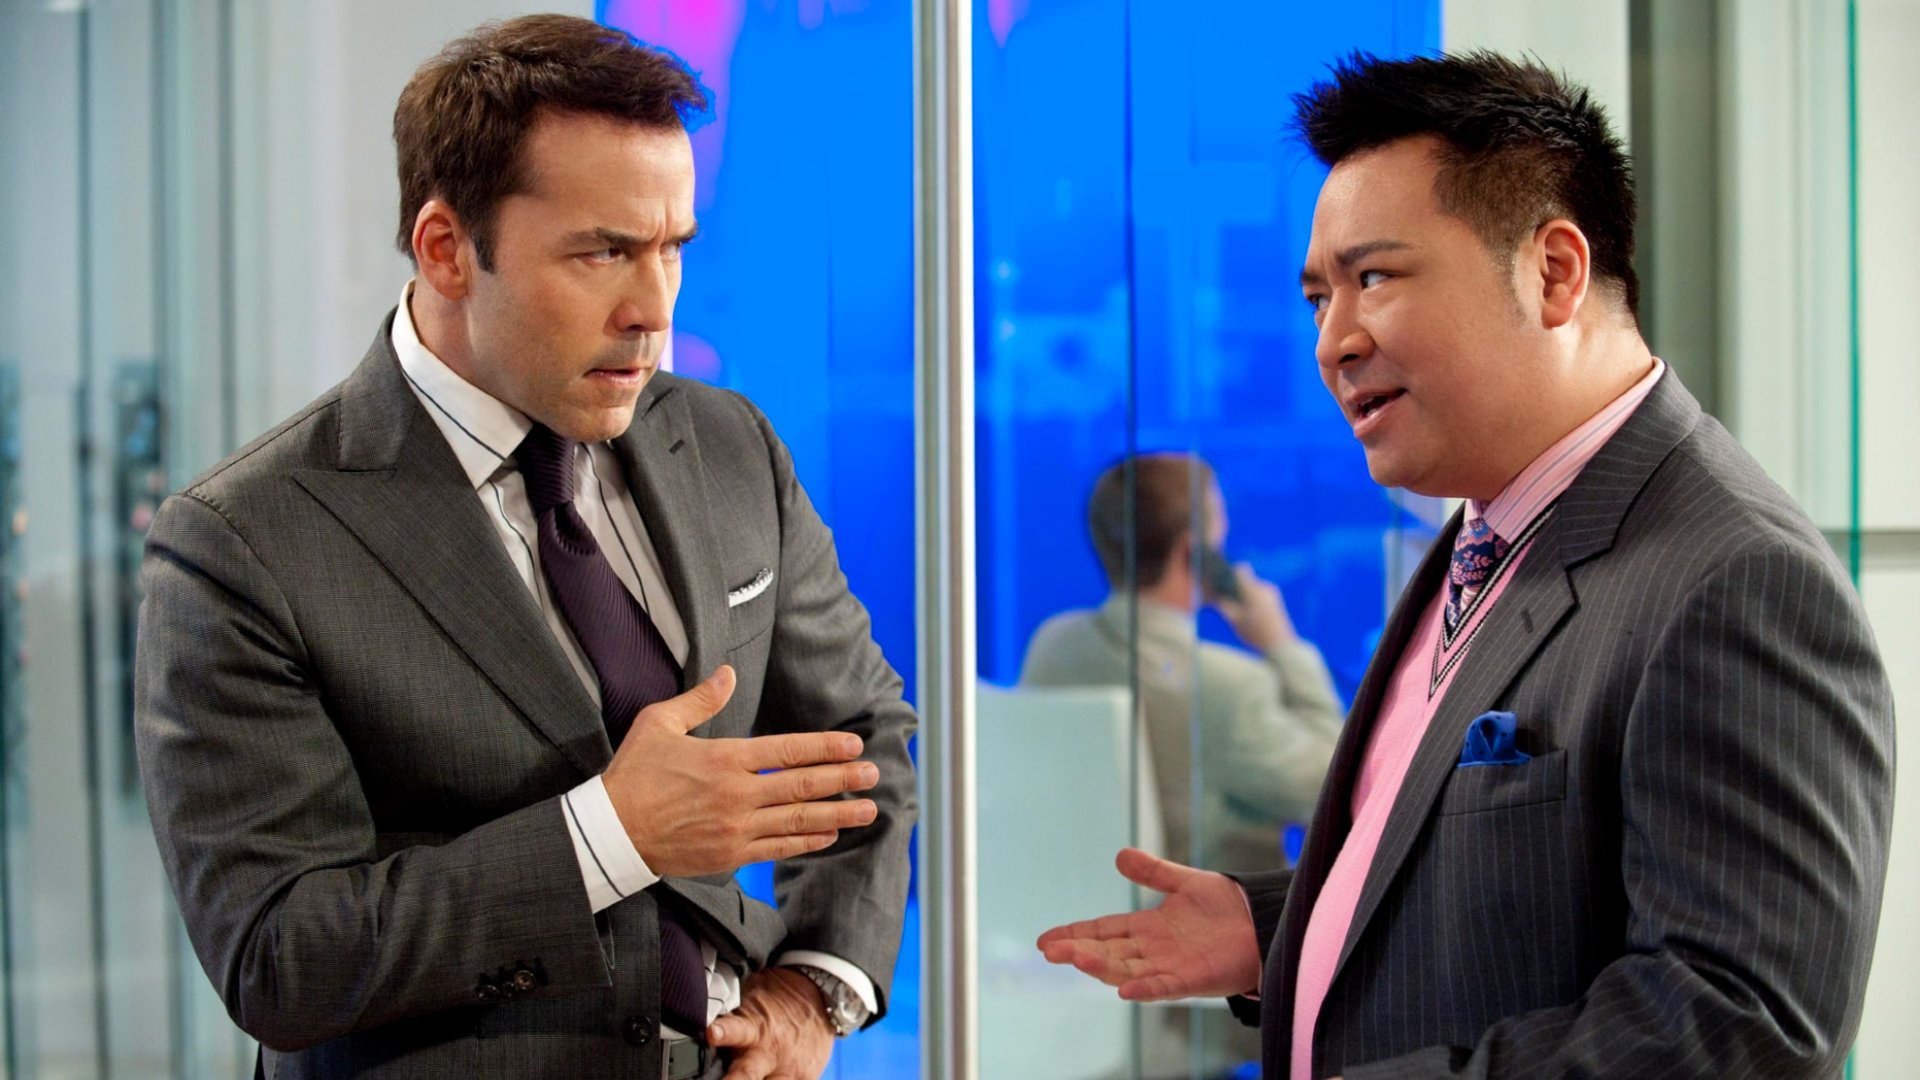 Lloyd's Drunk Pitch For An 'Entourage' Spin-Off Series Has Our Interest